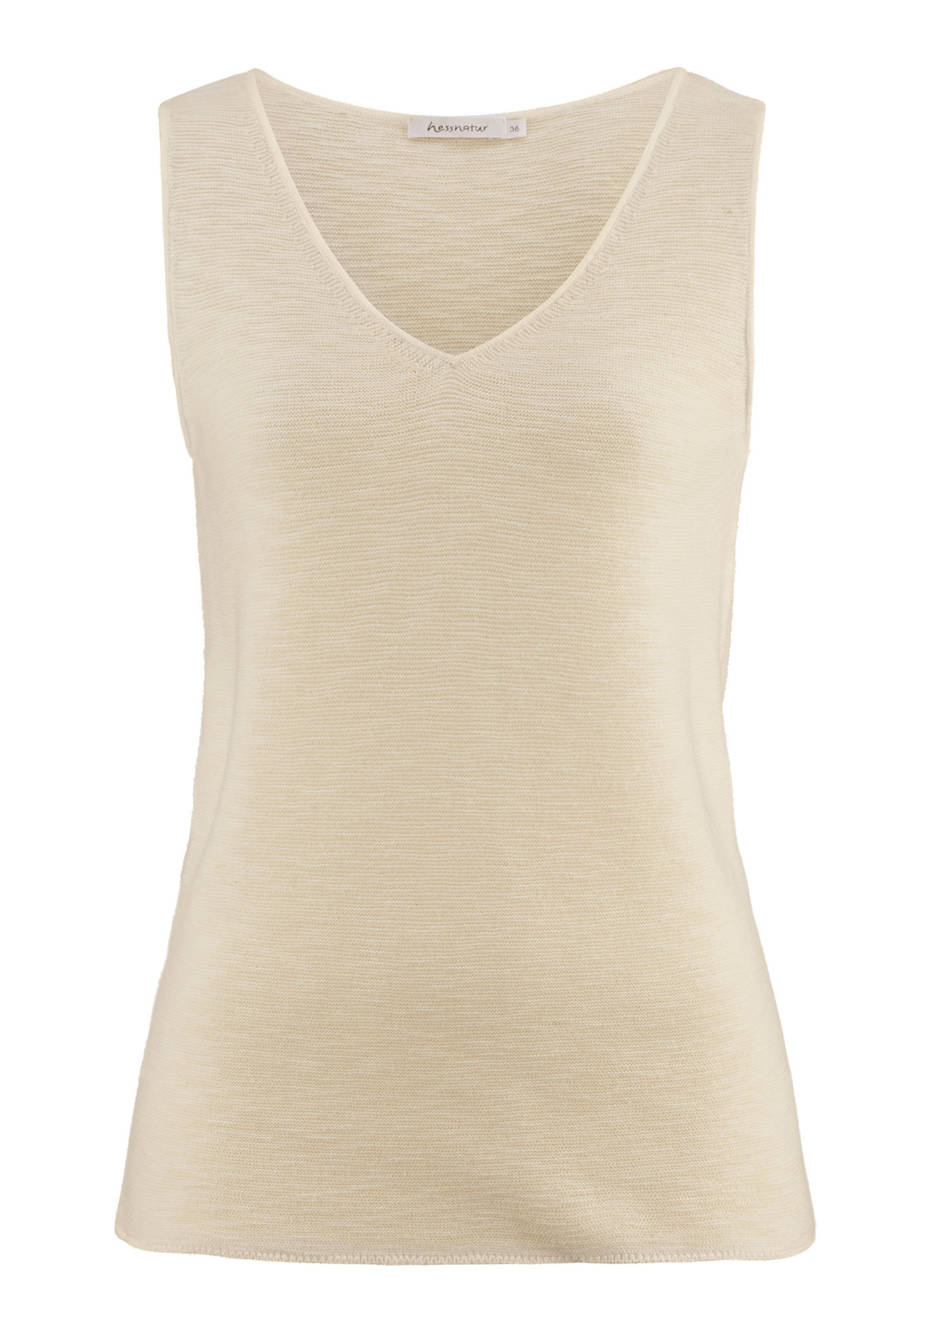 Knitted top made of pure organic cotton